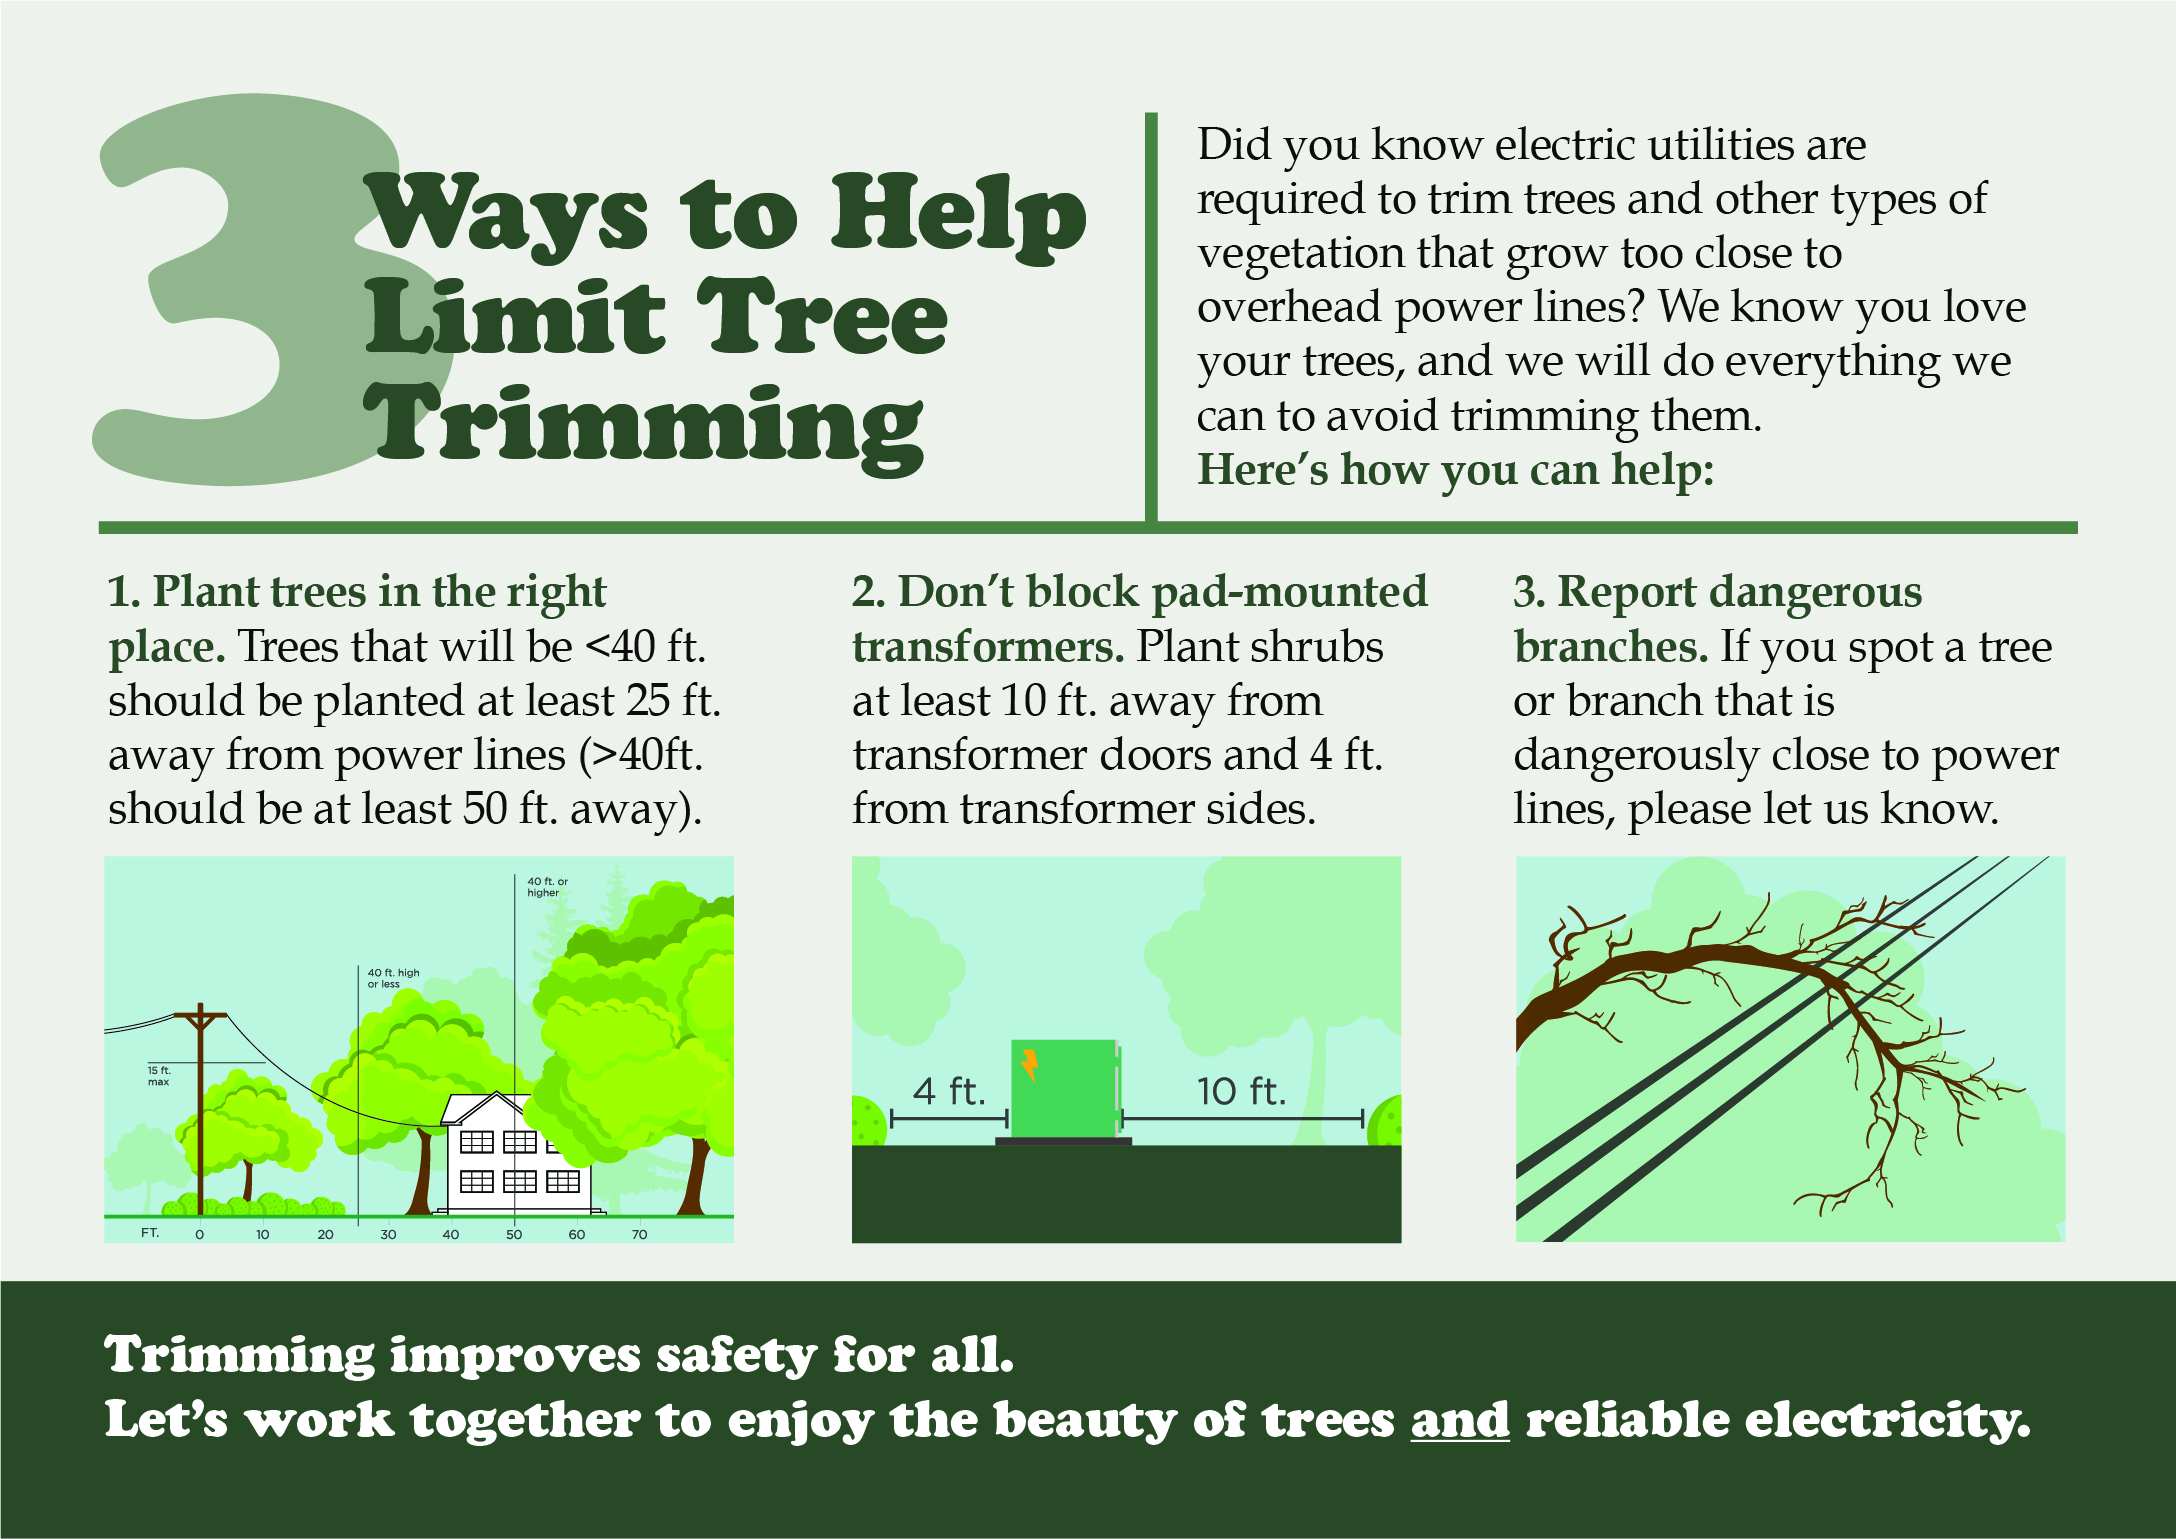 3 Ways to Help Limit Tree Trimming. Did you know electric utilities are required to trim trees and other types of vegetation that grow too close to overhead power lines? We know you love your trees, and we will do everything we can to avoid trimming them. Here's how you can help: 1.) Plant trees in the right place. Trees that will be <40 ft. should be planted at least 25 ft. away from power lines (>40 ft. should be at least 50 ft. away). 2.) Don't block pad-mounted transformers. Plant shrubs at least 10 ft. away from transformer doors and 4 ft. from transformer sides. 3.) Report dangerous branches. If you spot a tree or branch that is dangerously close to power lines, please let us know. | Trimming improves safety for all. Let's work together to enjoy the beauty of trees AND reliable electricity.